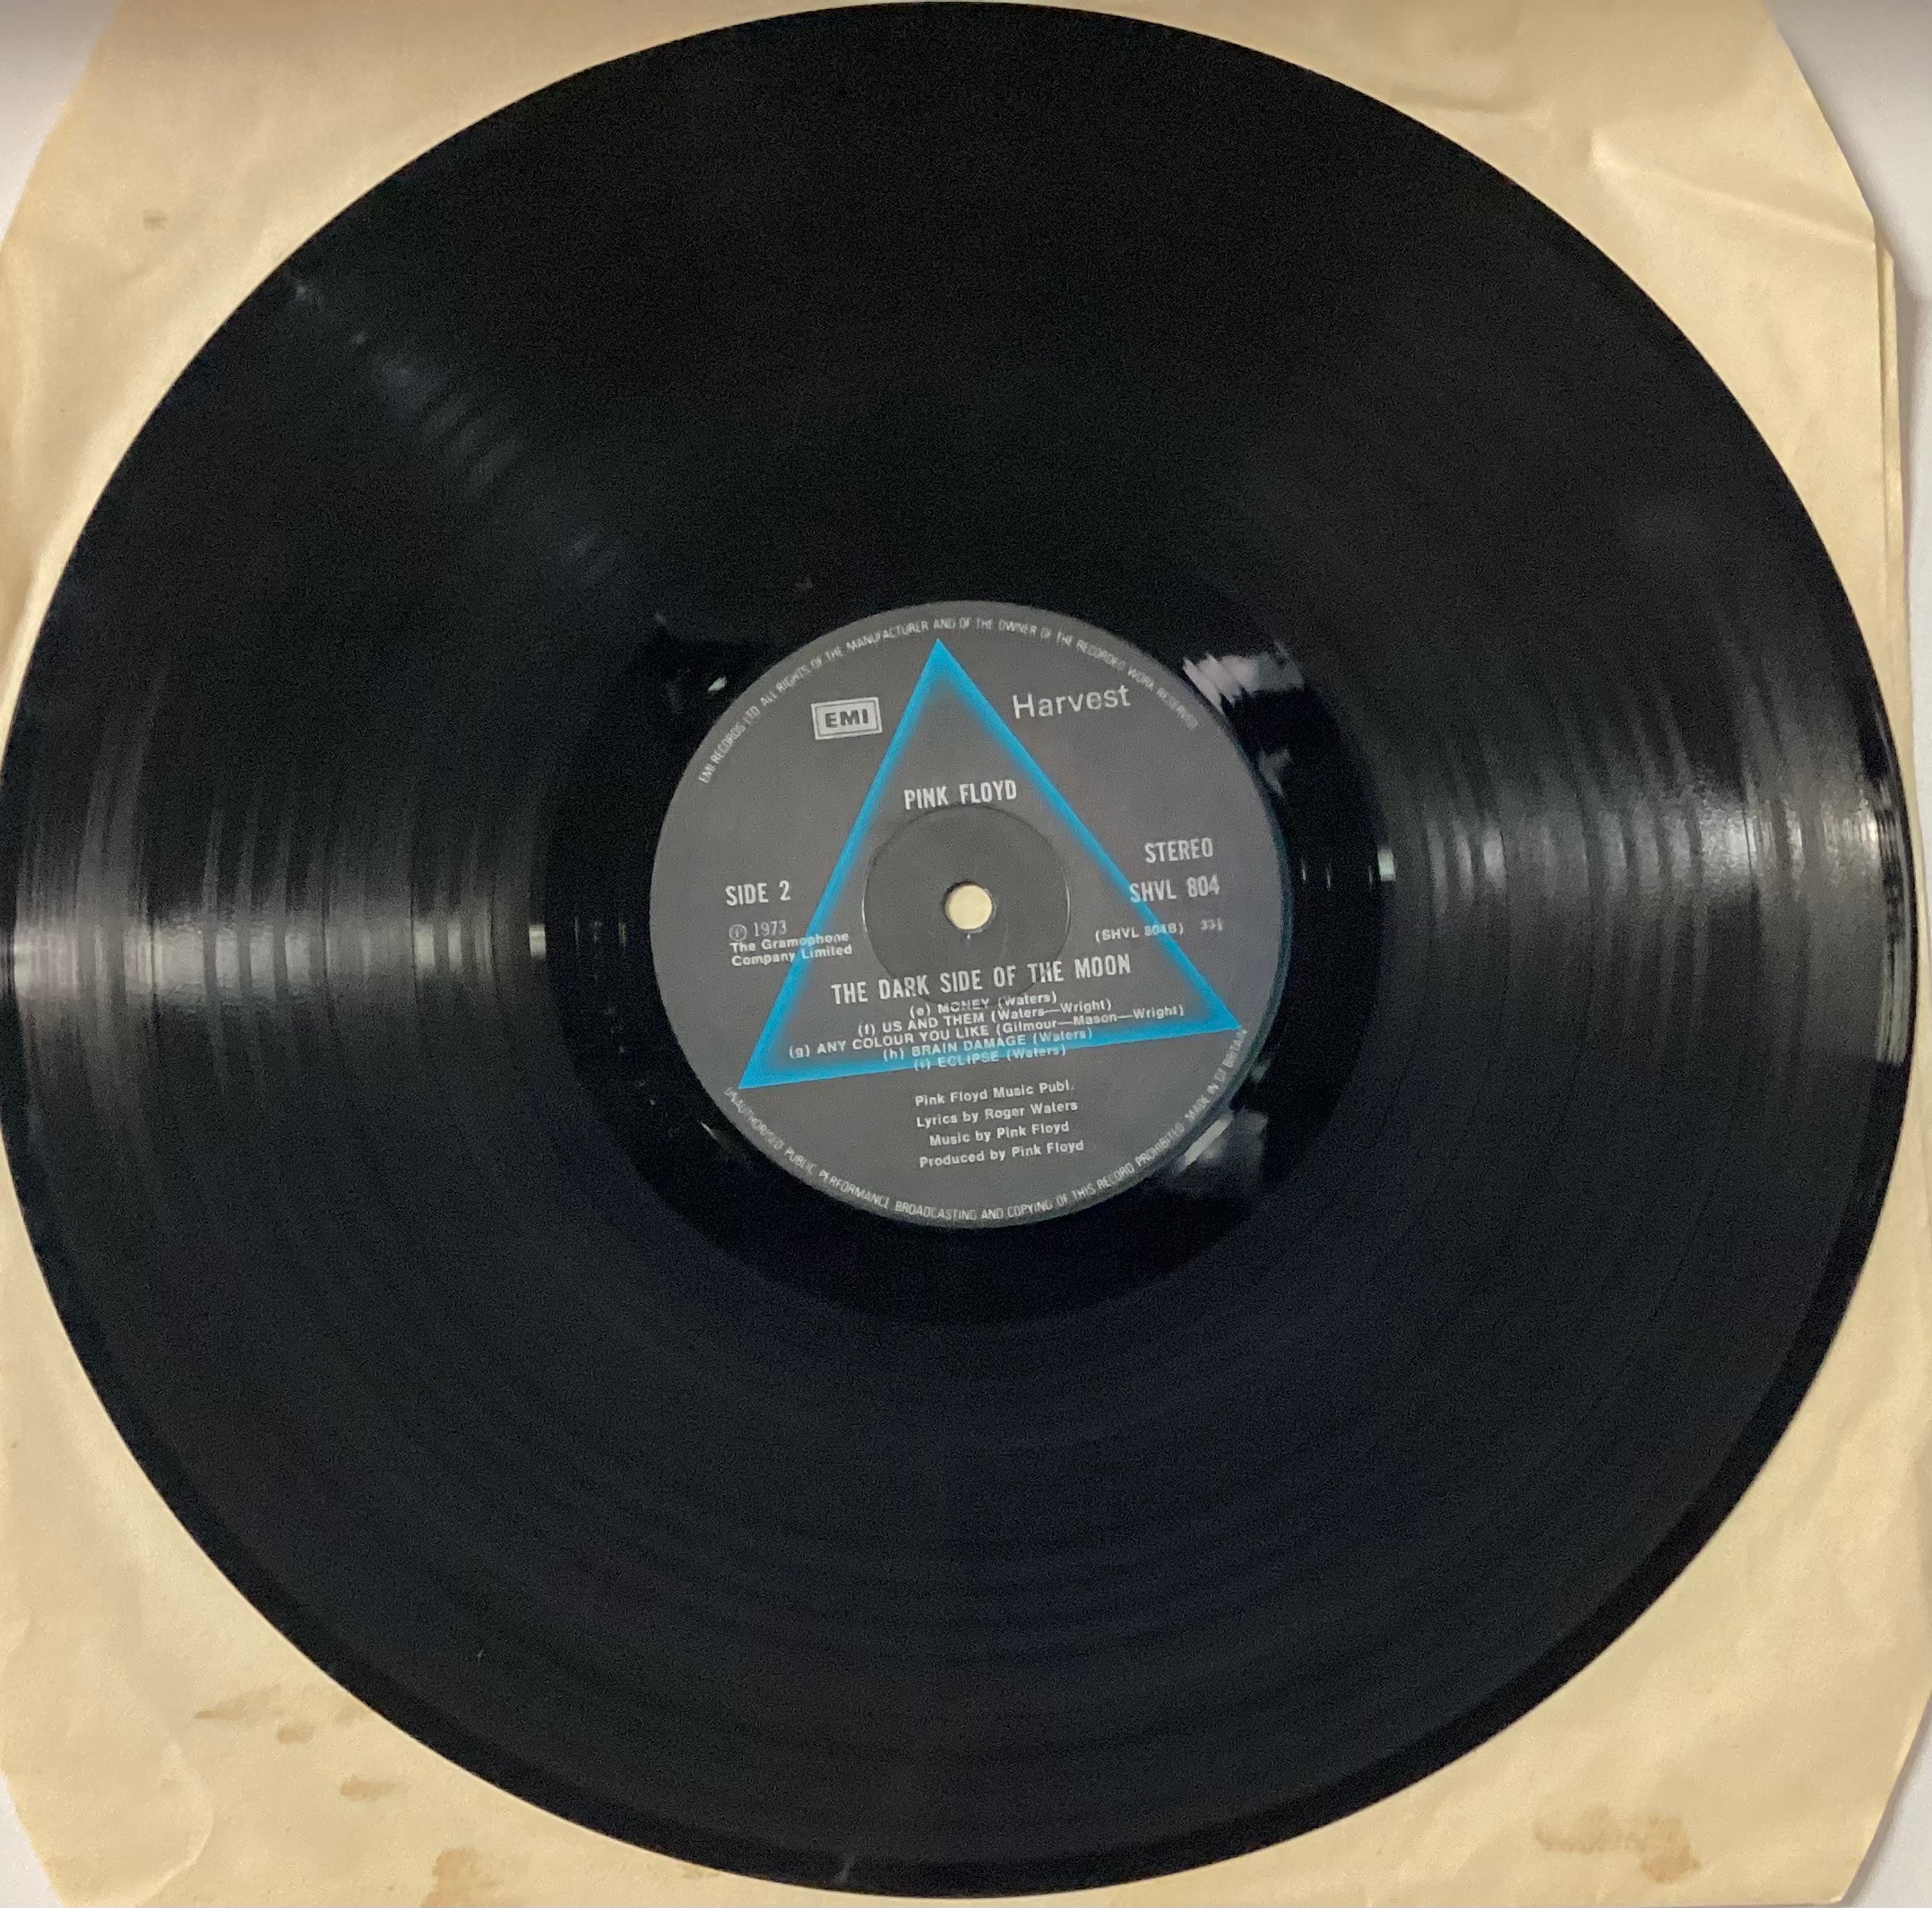 PINK FLOYD ‘DARK SIDE OF THE MOON’ VINYL LP RECORD. Found here on Harvest Records SHVL 804 from - Image 3 of 5